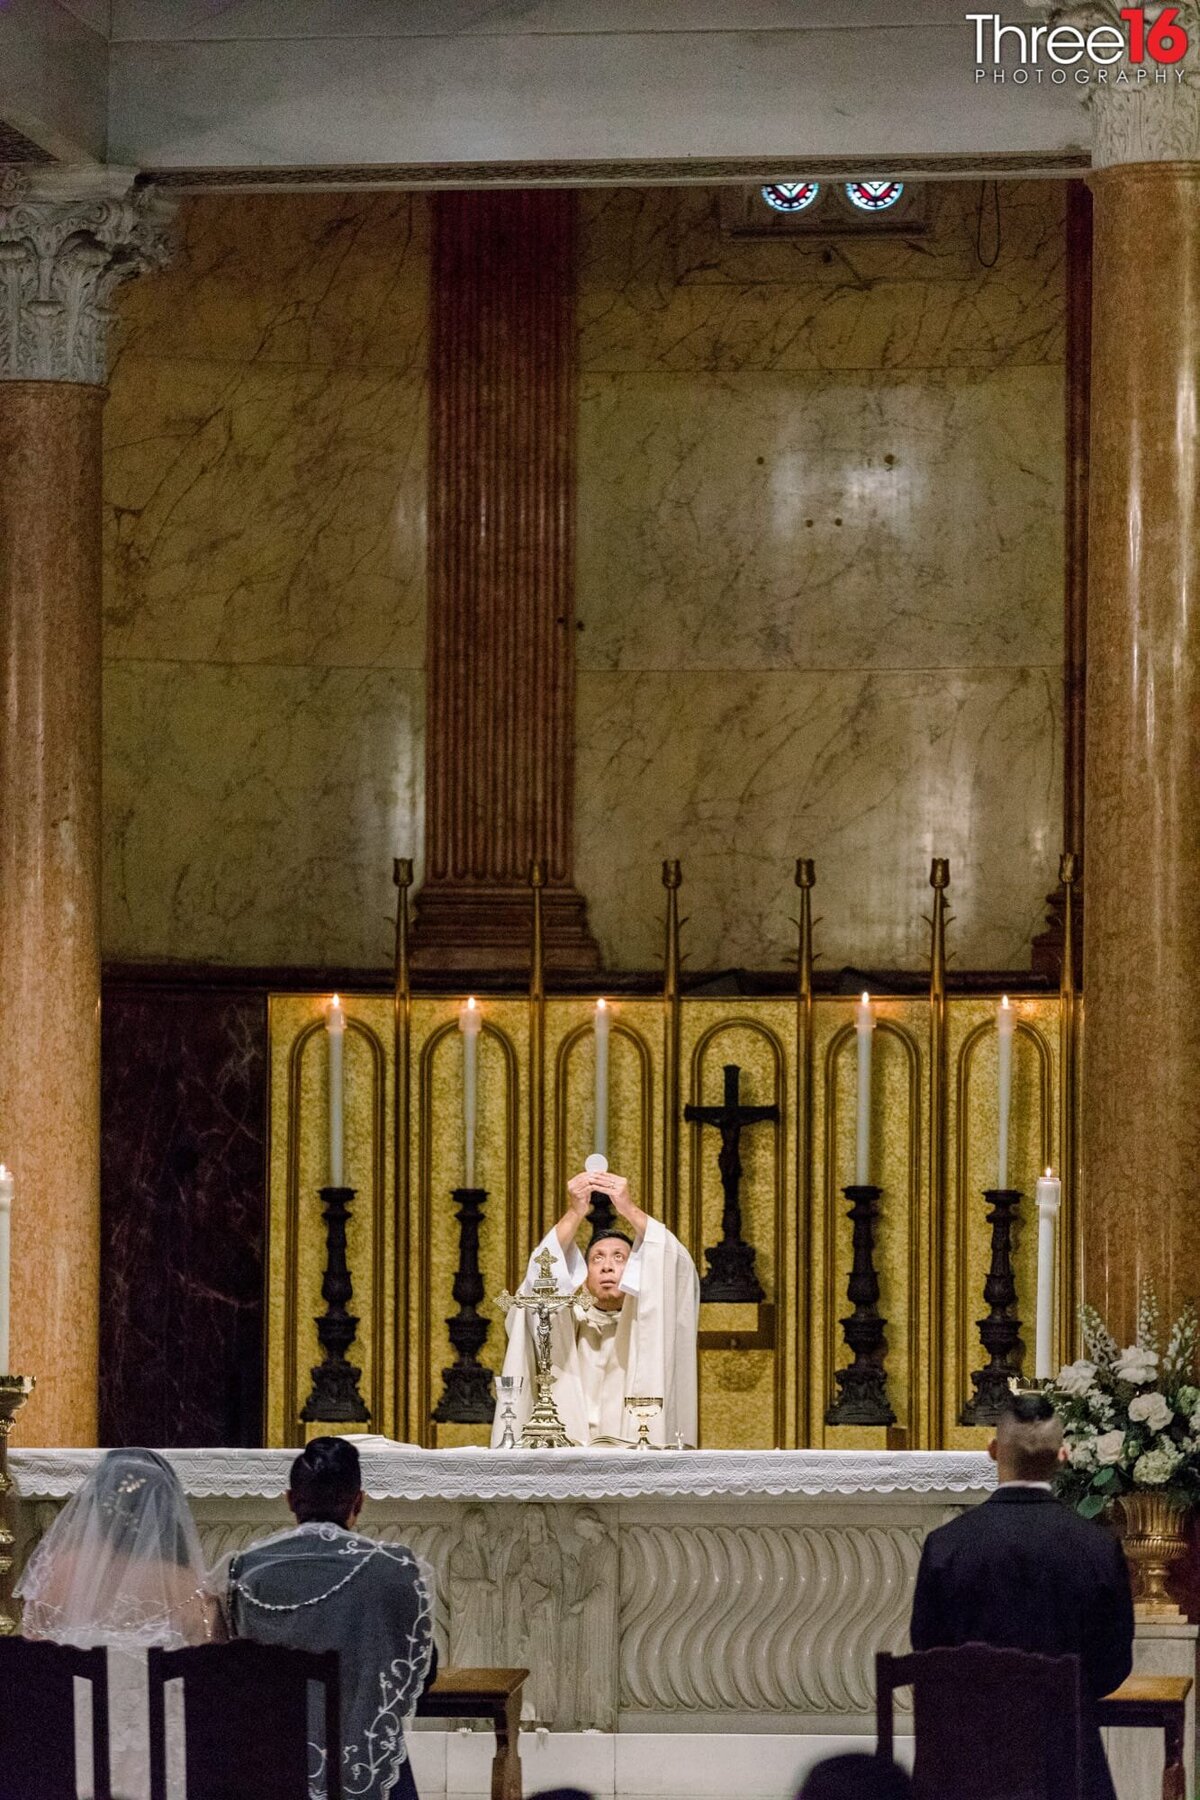 Priest performs a Catholic wedding ceremony as the Bride and Groom sit in chairs facing the altar